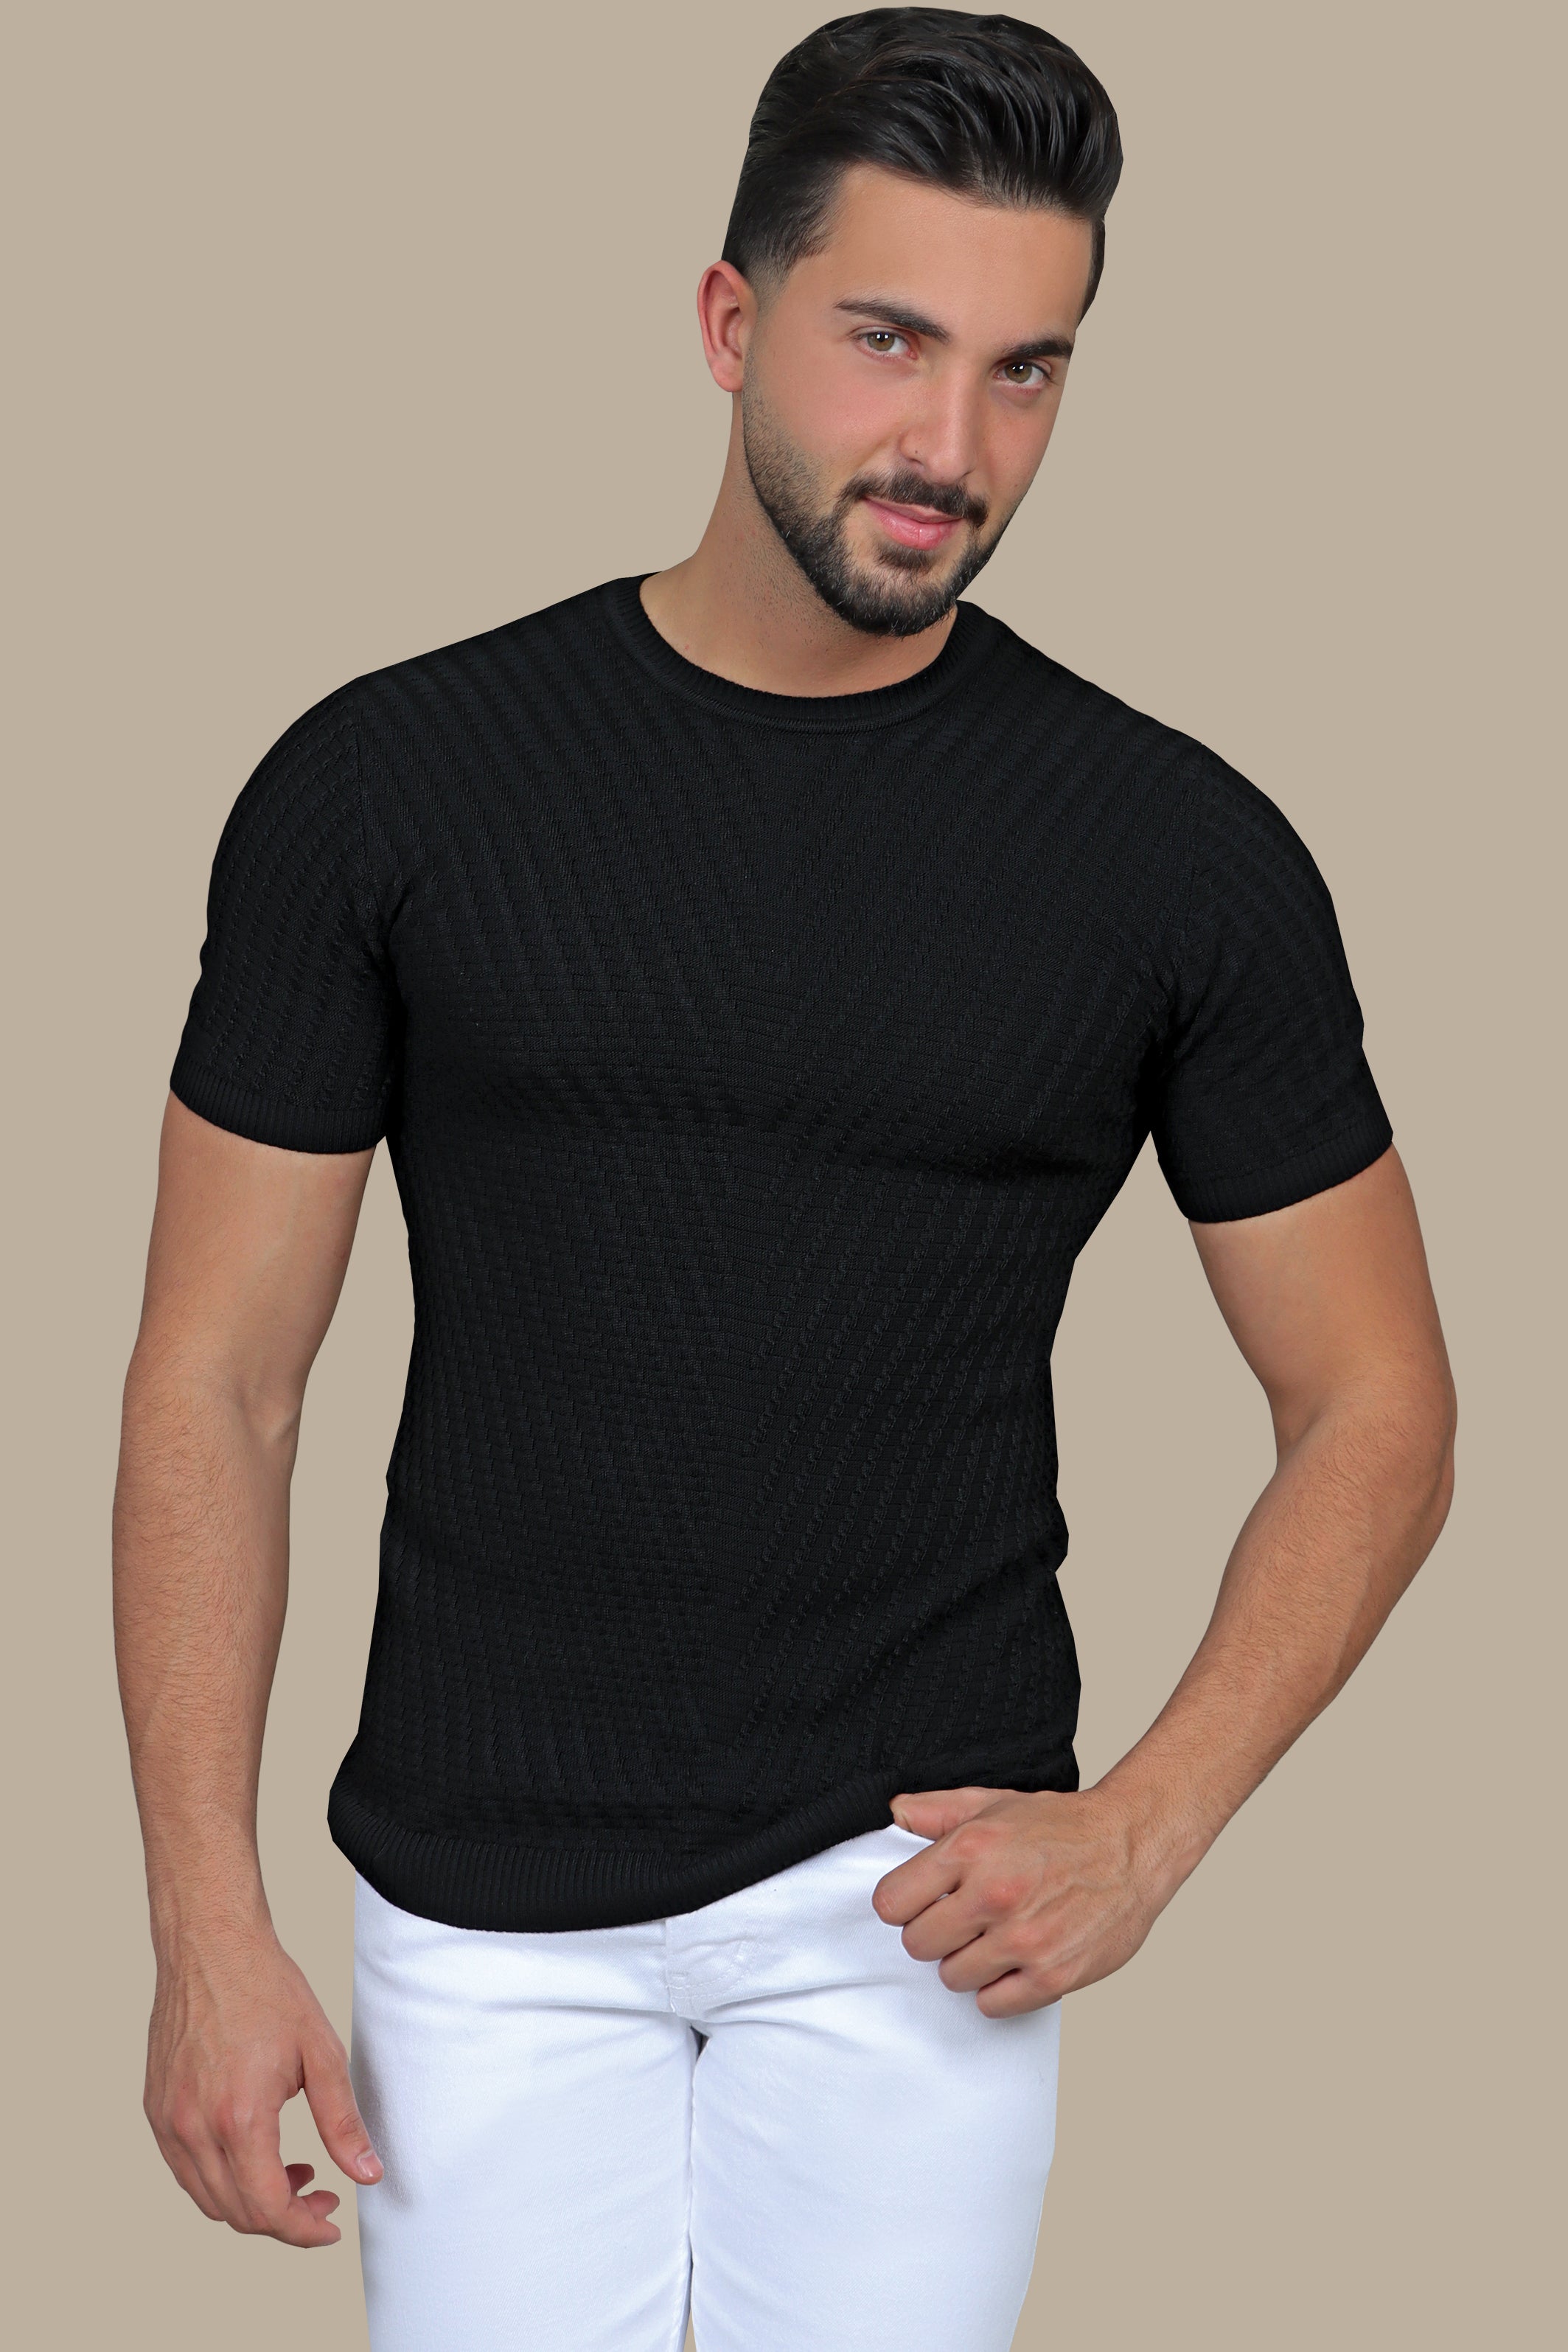 Classic Black: Knitted Round Neck T-Shirt